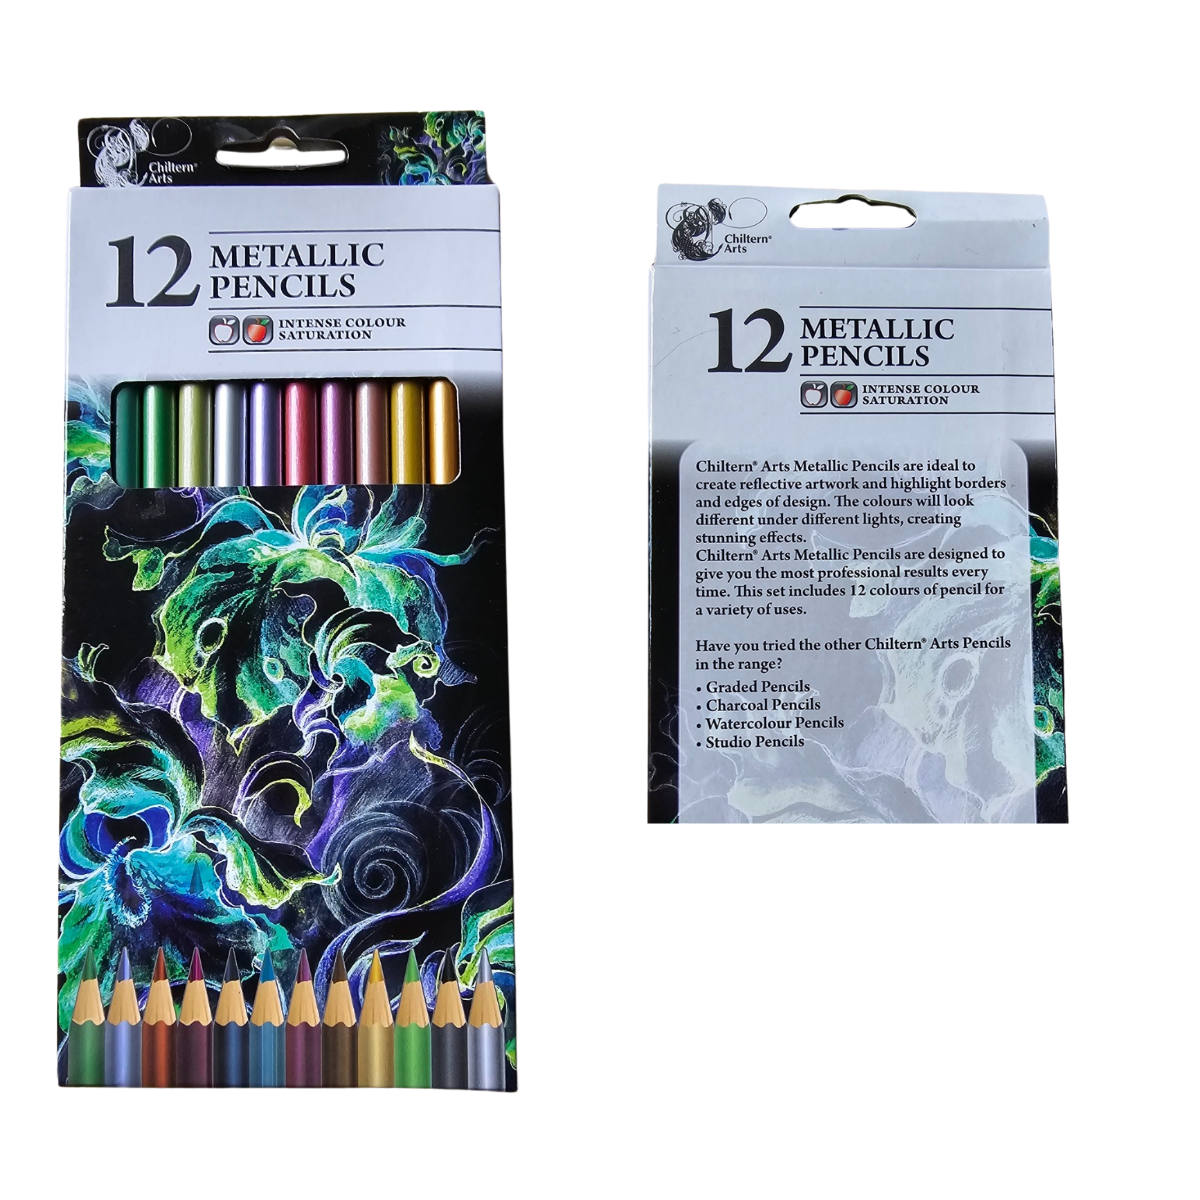 Metallic Pencils Pack of 12 - Artists Crafts Multi-use Colouring